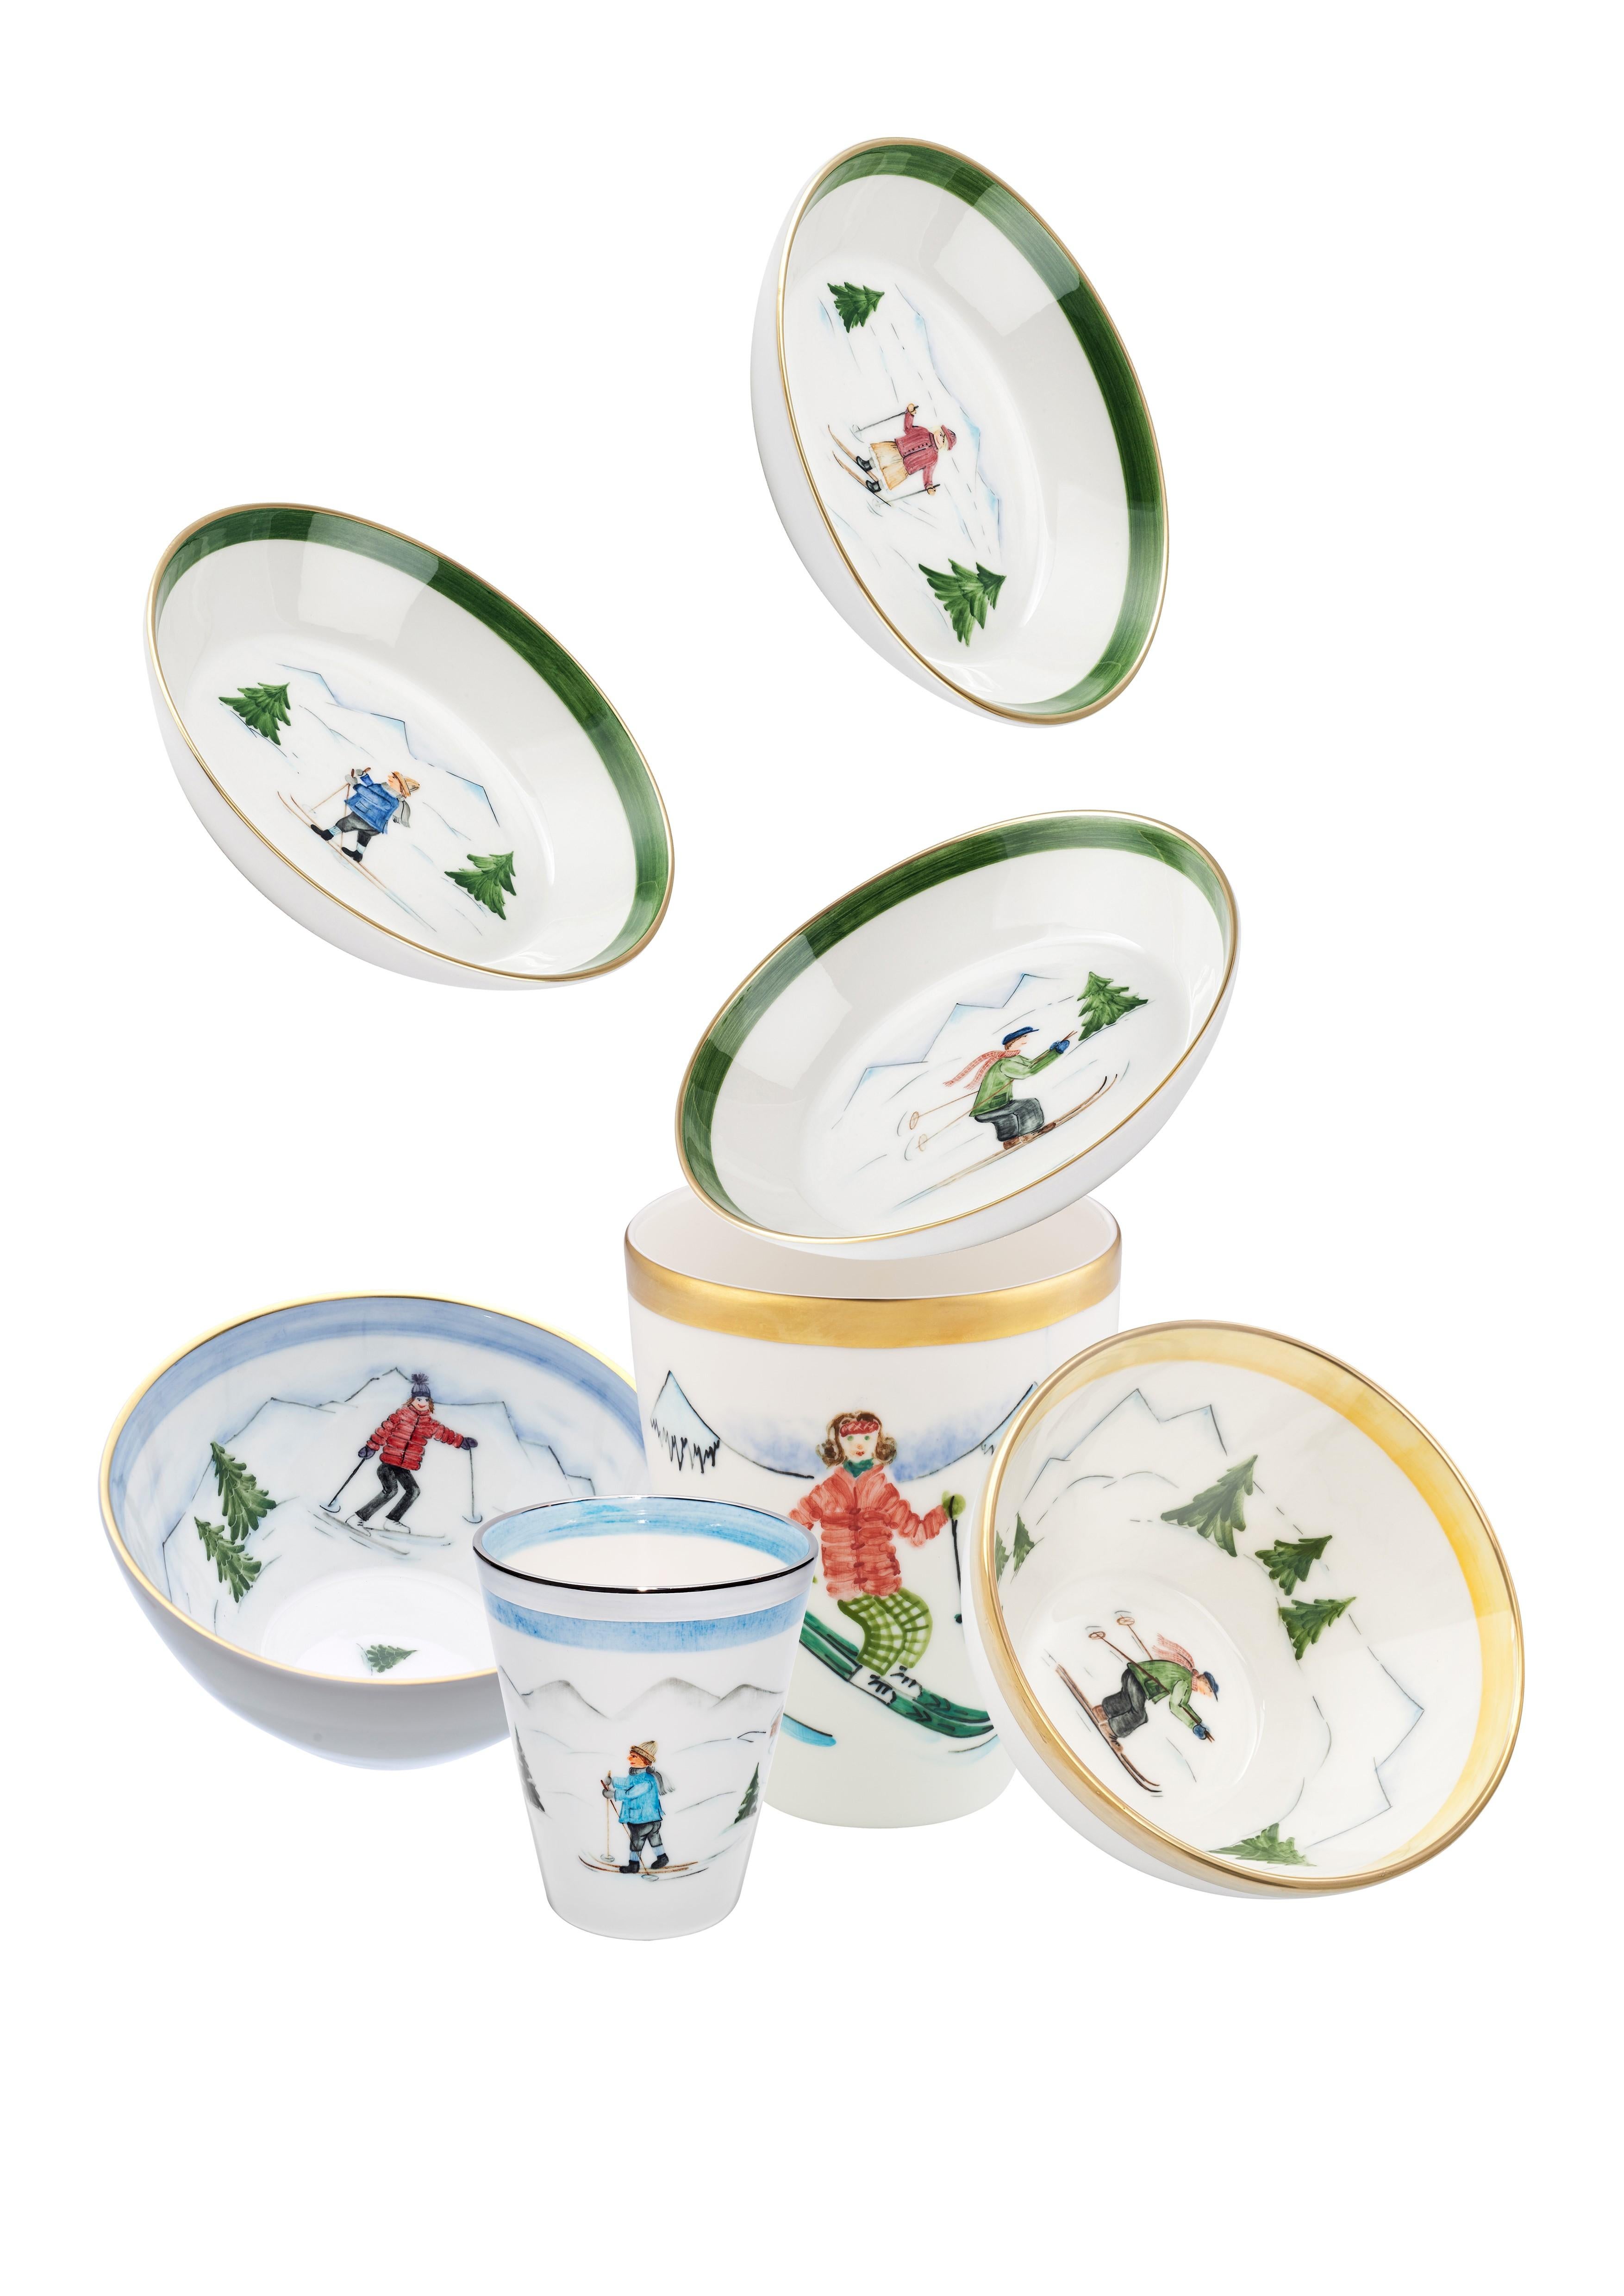 Modern Country German Style Hand-Painted Porcelain Dish with Skier Decor For Sale 1